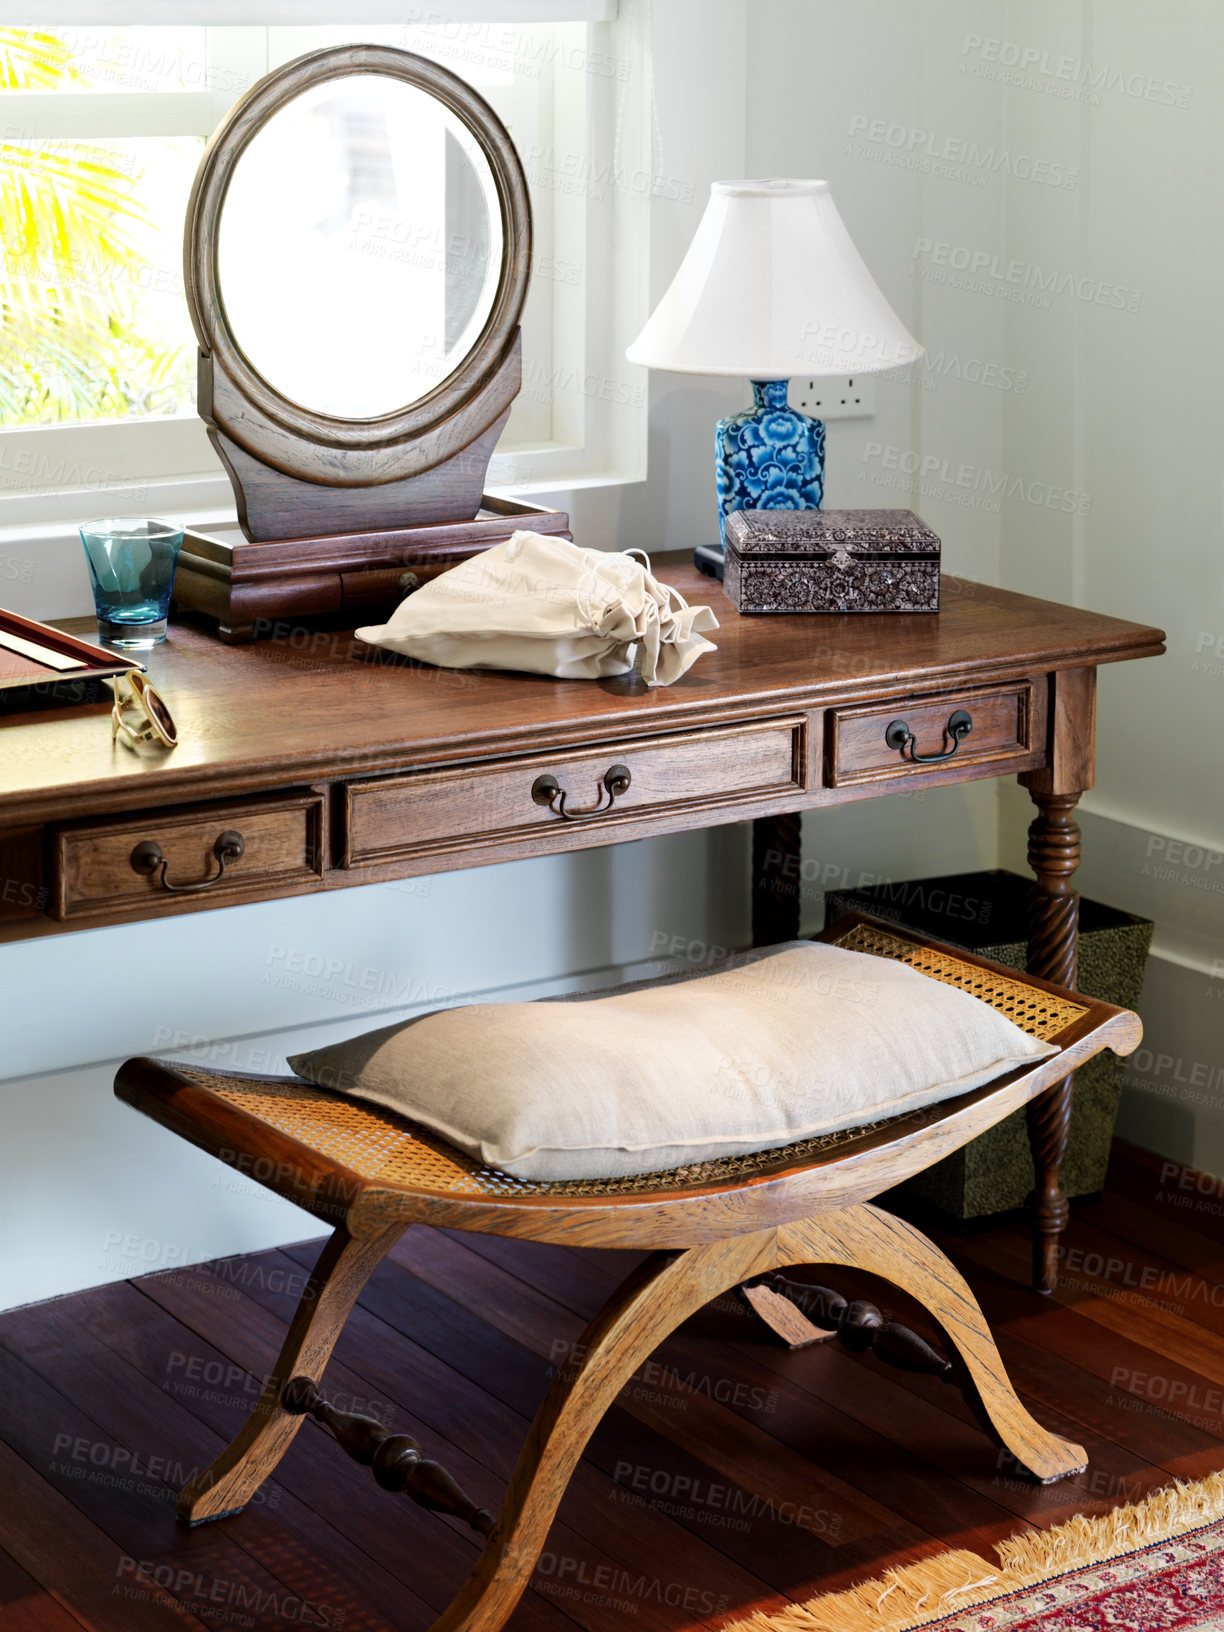 Buy stock photo Beautiful wooden dressing table and mirror in a hotel bedroom. Vintage furniture in a modern hotel by a window. Antique bench and dresser with a mirror on top in a room of an old school resort